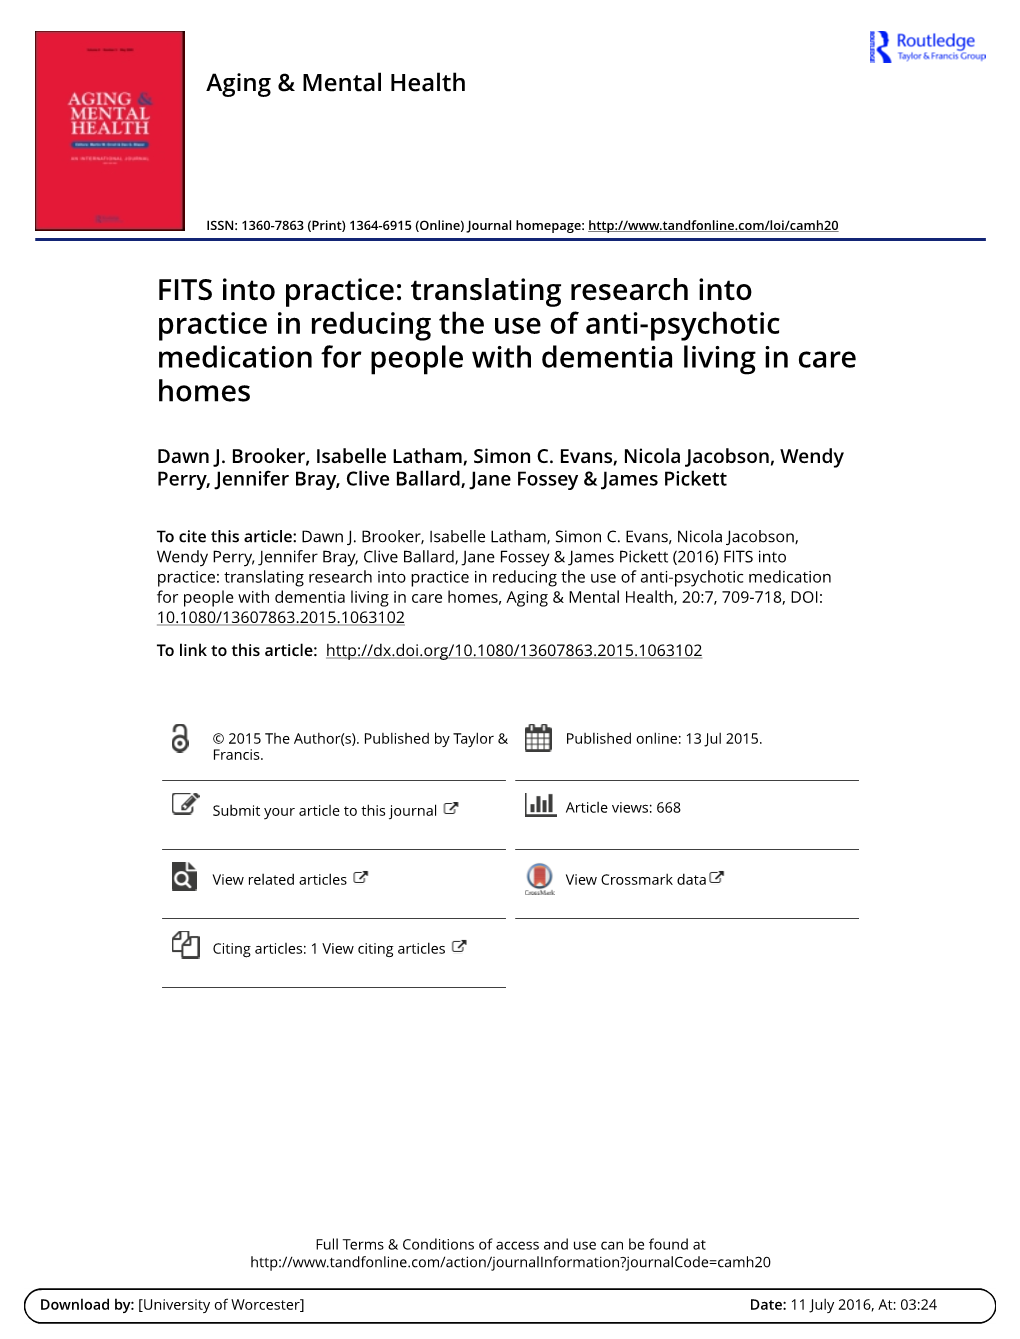 FITS Into Practice: Translating Research Into Practice in Reducing the Use of Anti-Psychotic Medication for People with Dementia Living in Care Homes